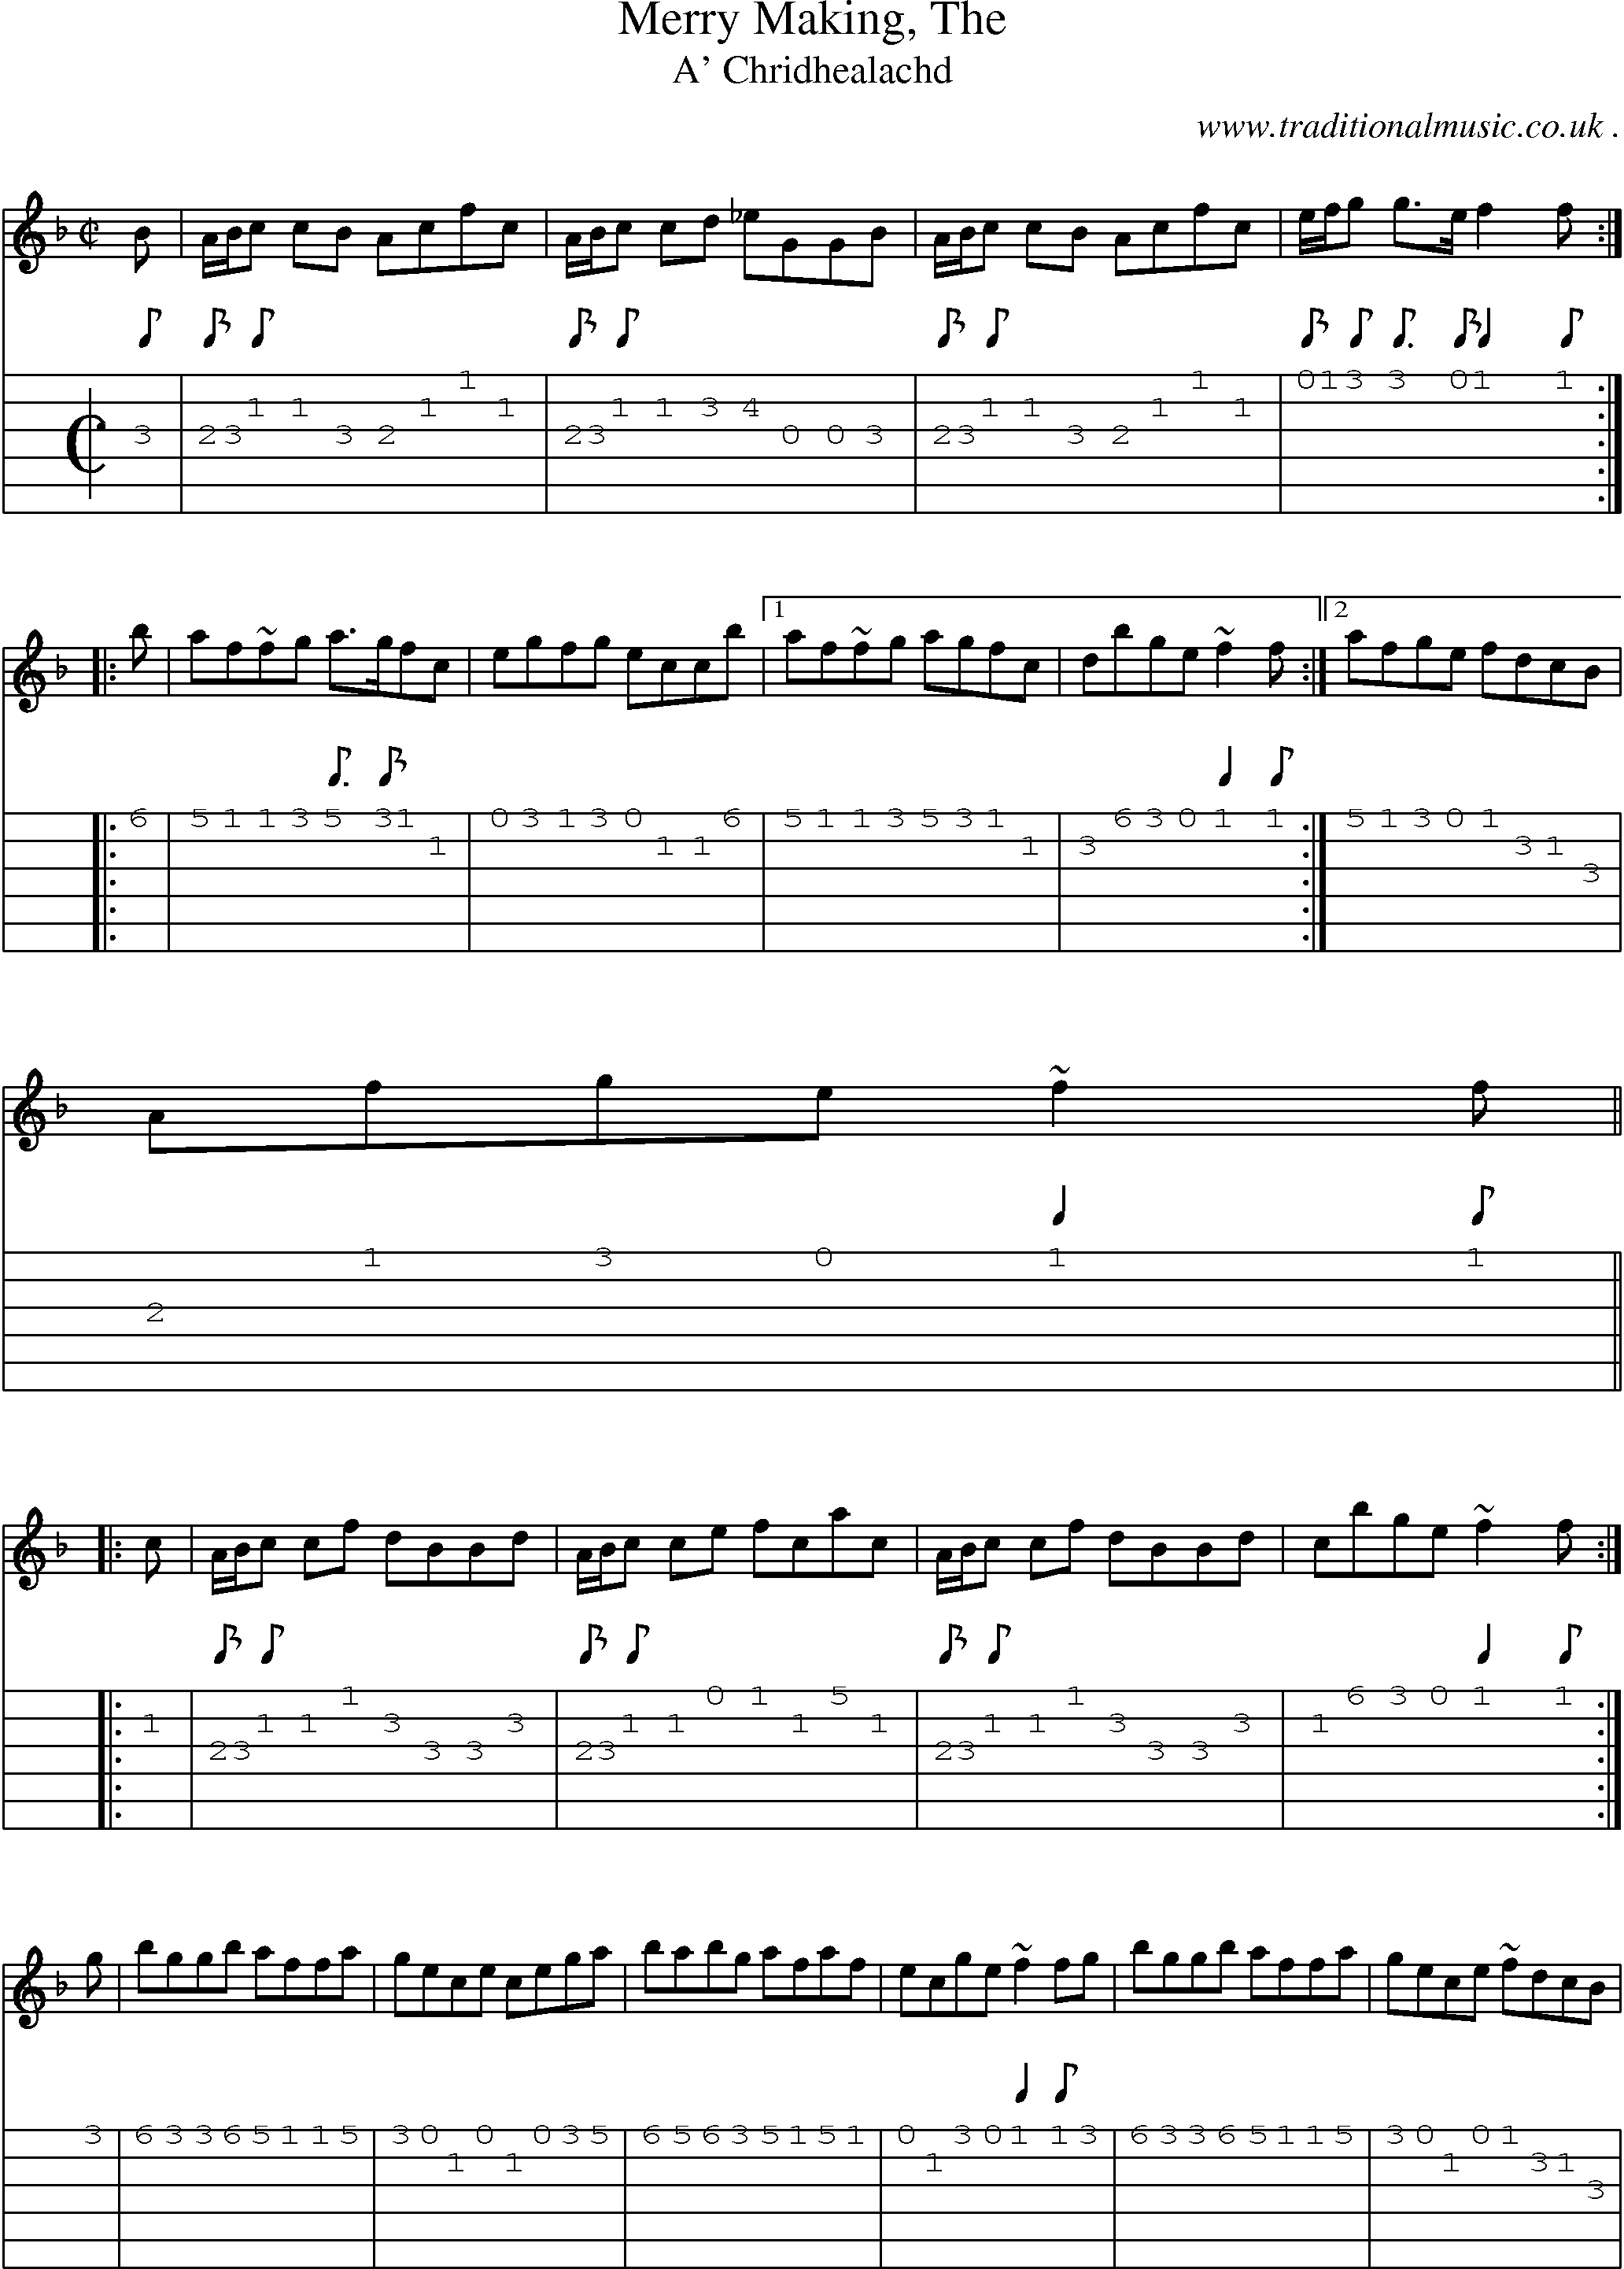 Sheet-music  score, Chords and Guitar Tabs for Merry Making The